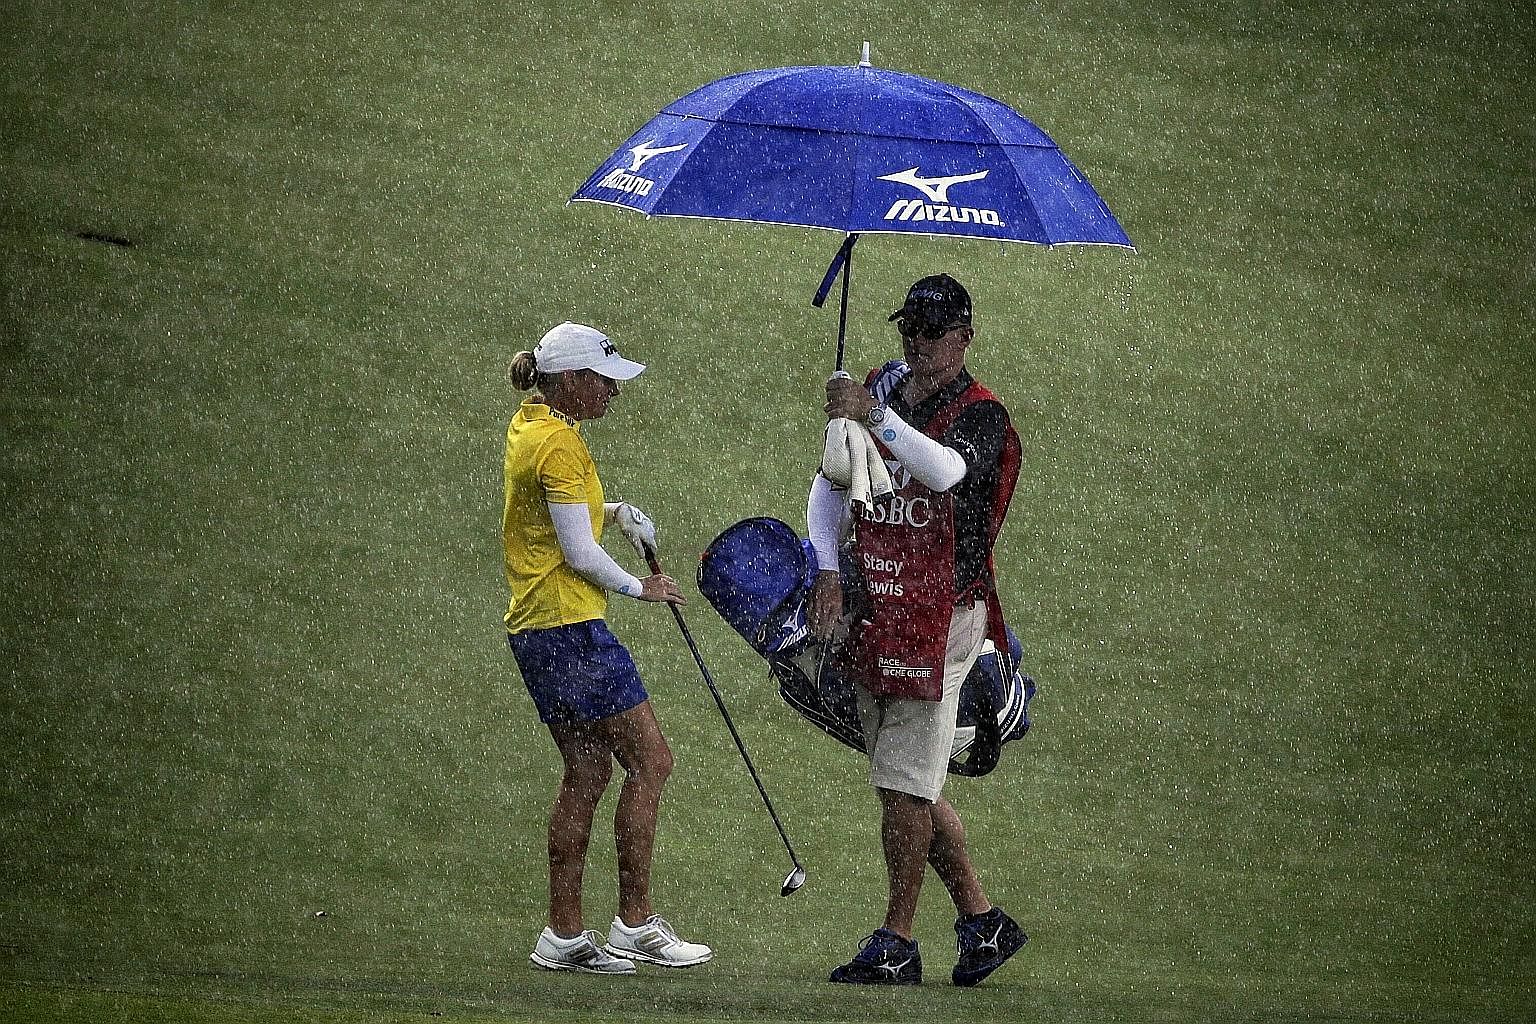 American Stacy Lewis battling the elements during the second round of the HSBC Women's Champions. The 2013 champion carded a one-over 73 yesterday, after a 68 on Thursday.